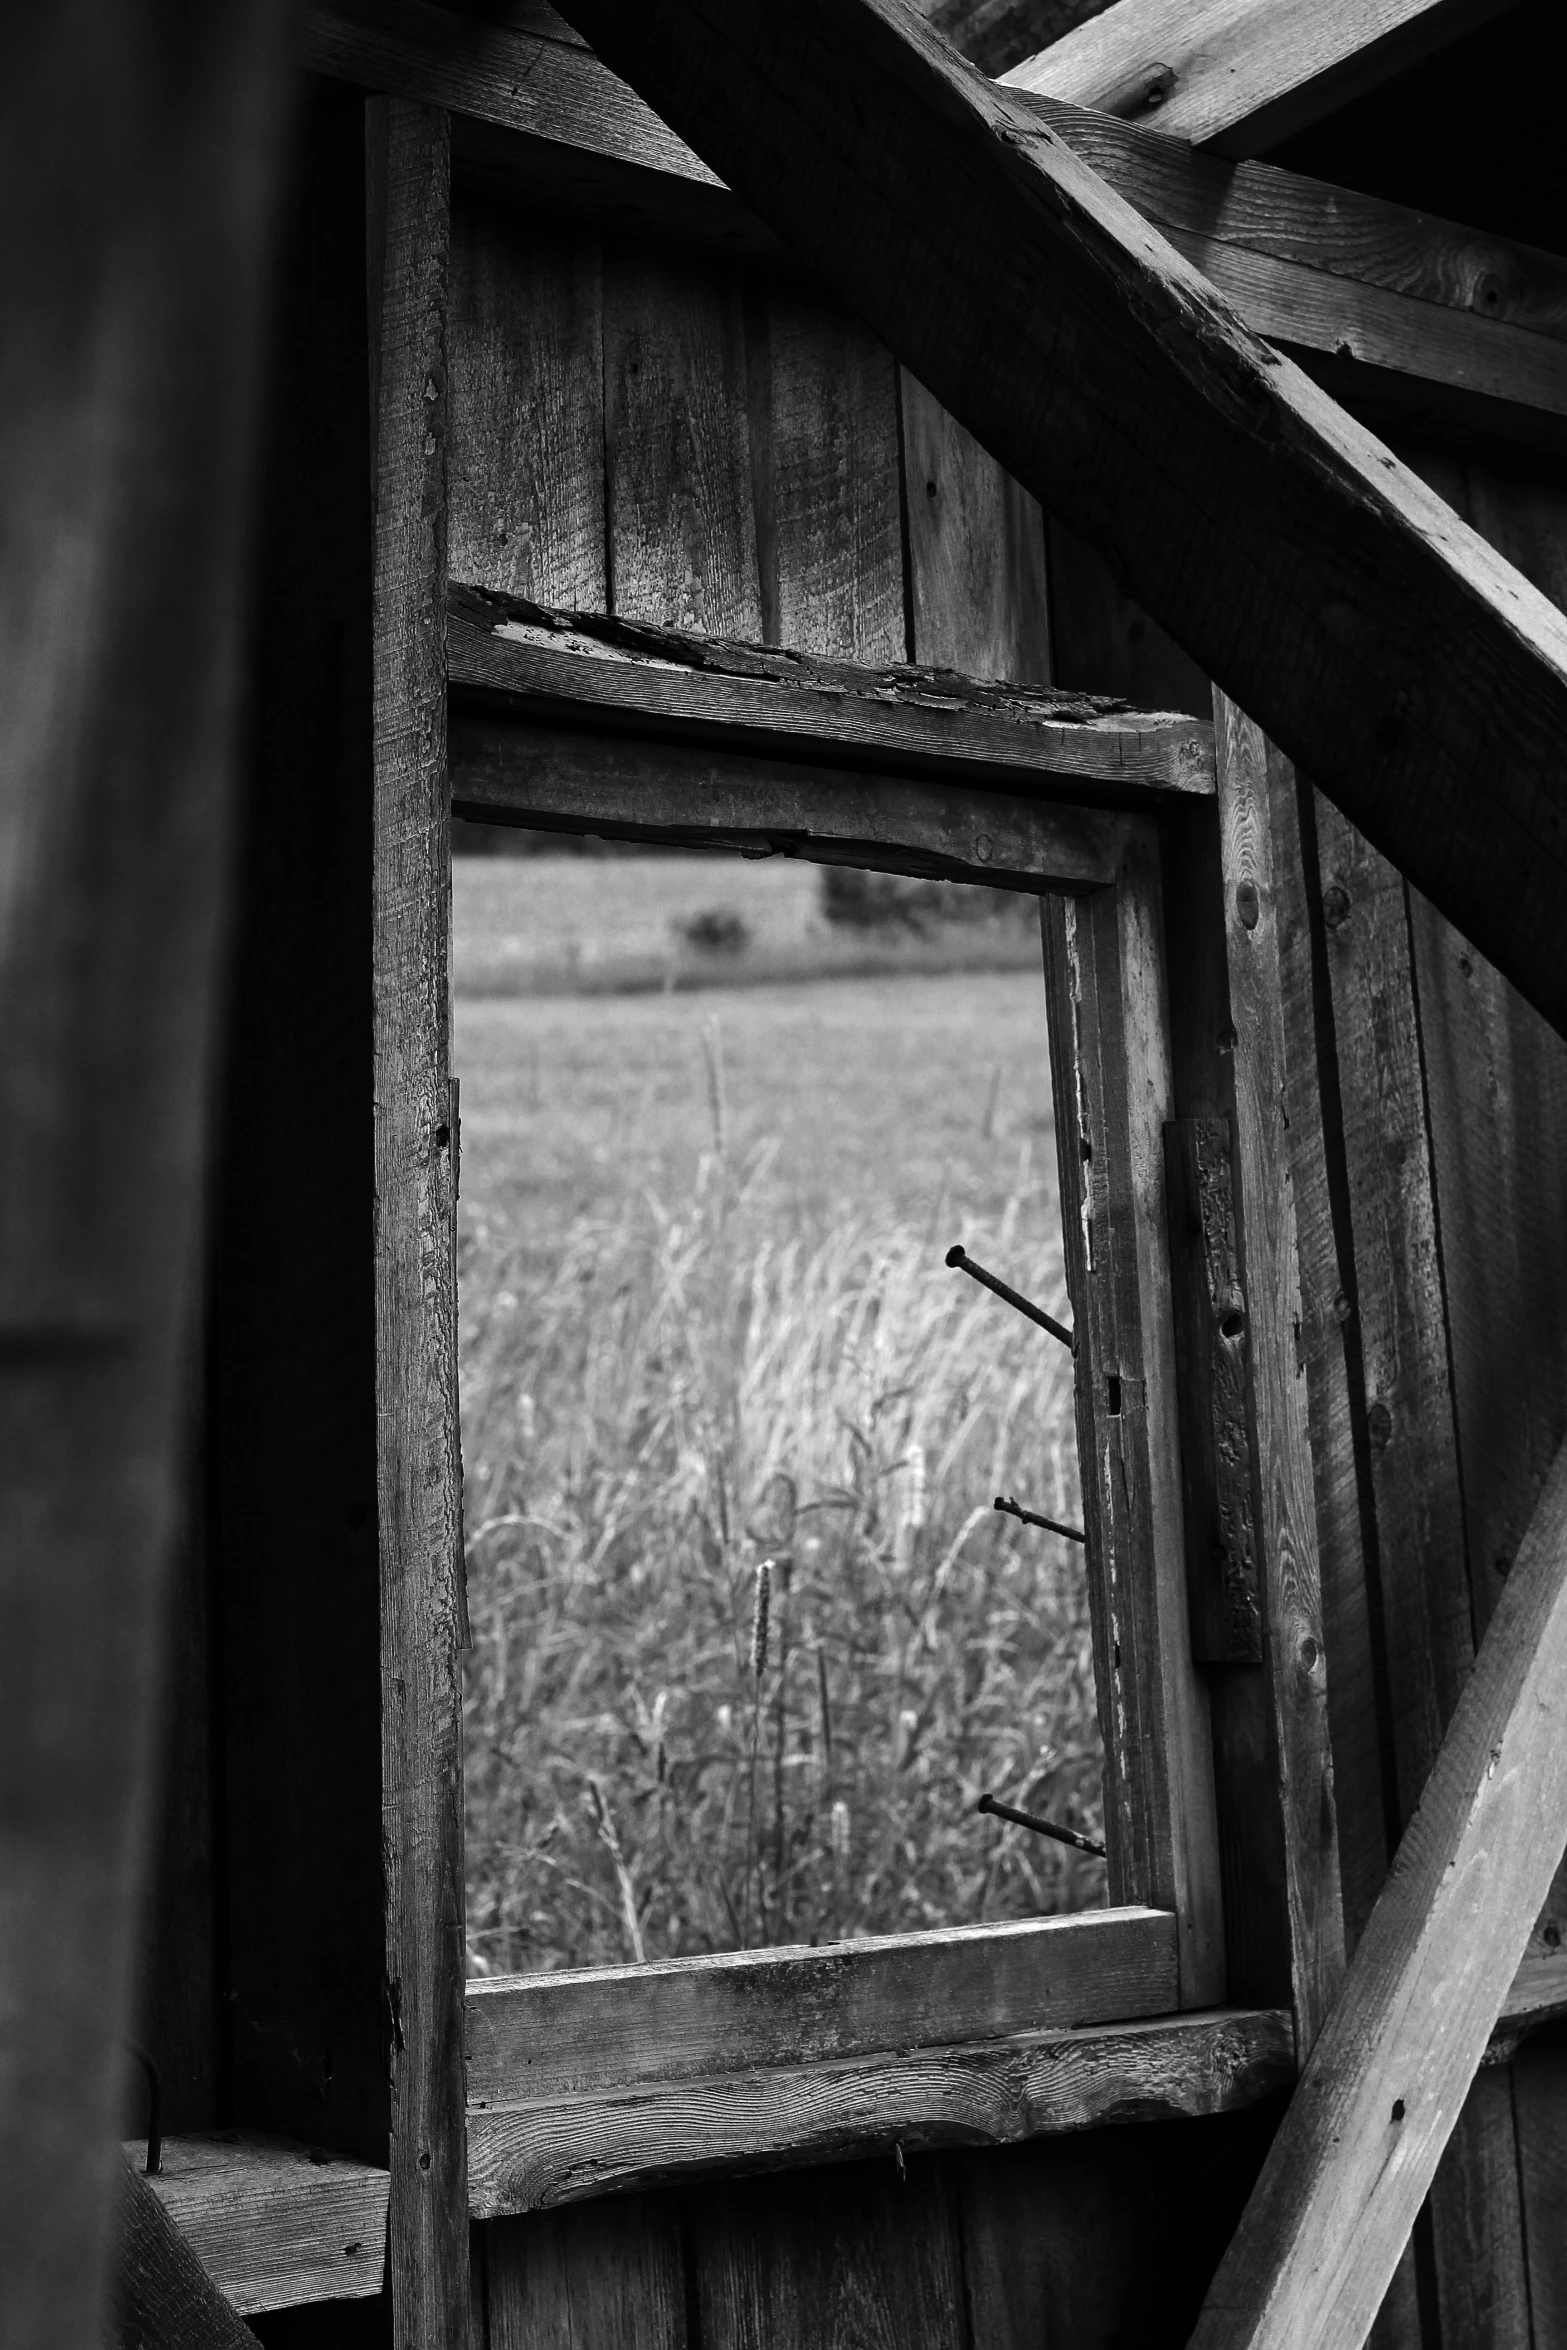 black and white po looking out a window at a grassy field